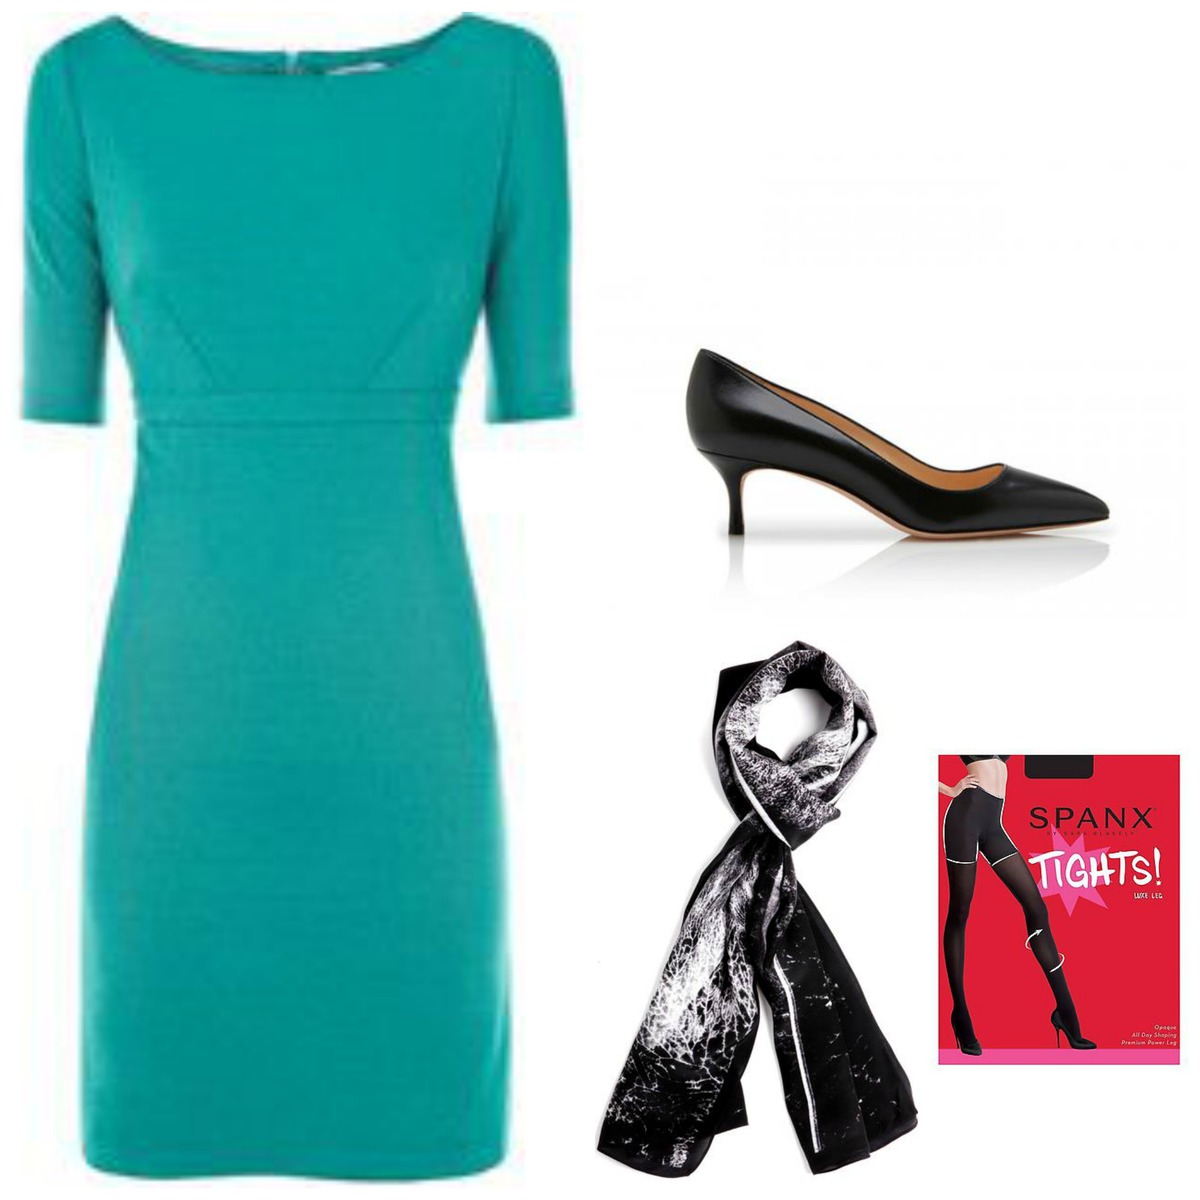 Oh the power of a scarf! A scarf and opaque tights will transform a basic ponte work dress.